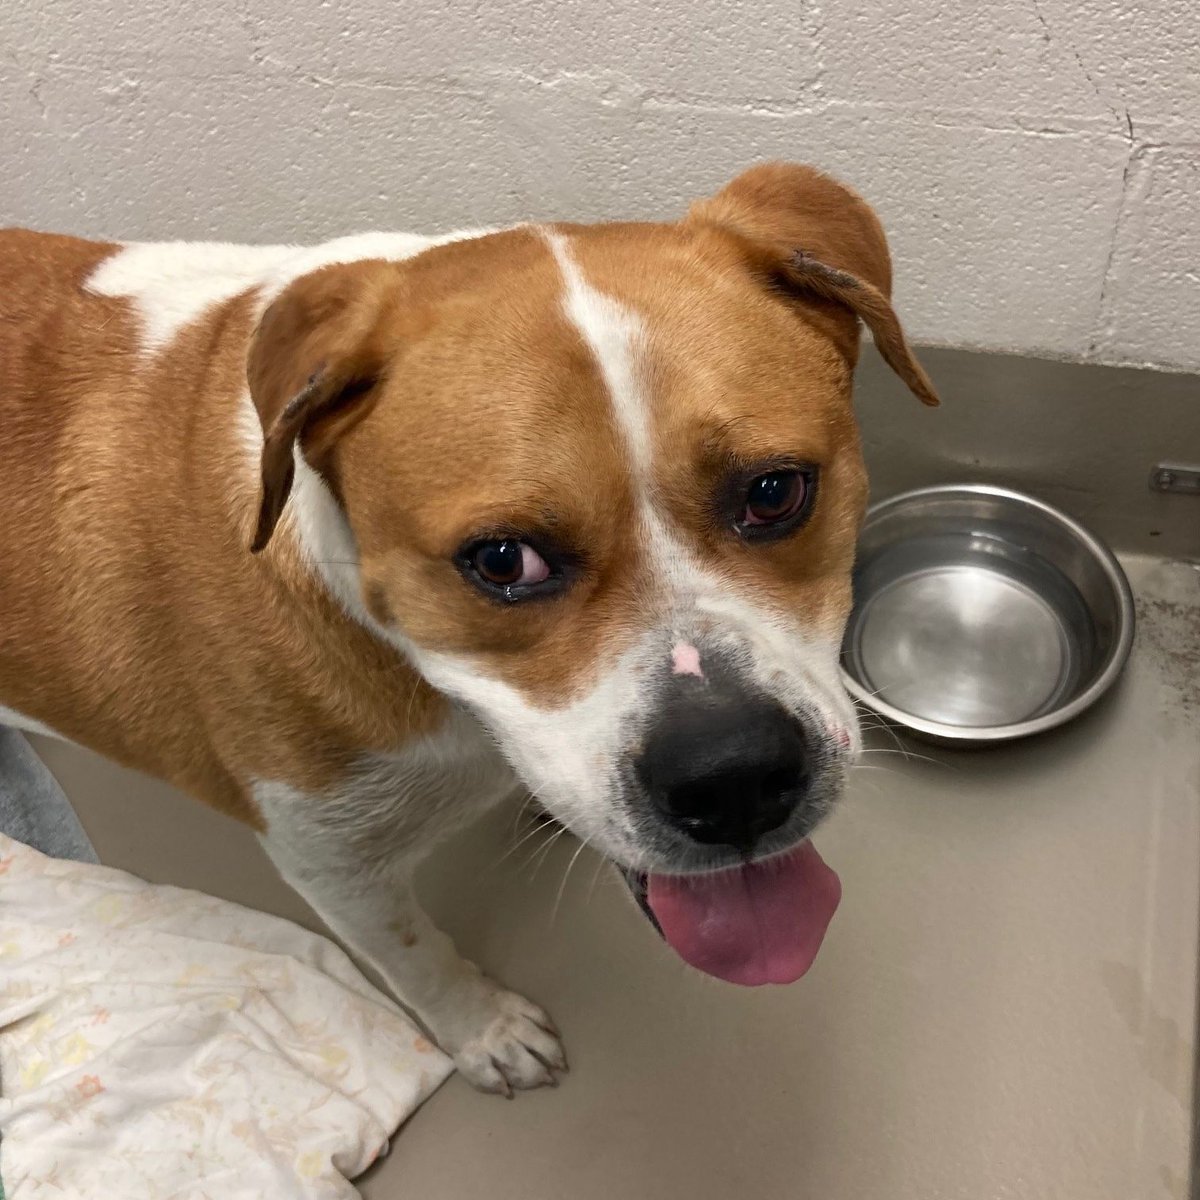 #AACStrayoftheDay This big chonky boy was found at the Silver Springs Apartments (12151 N Hwy 35) in 78753. He is neutered but not microchipped. We'd love to get him back home! Please email animal.reclaim@austintexas.gov if you know where he belongs. ID A903317